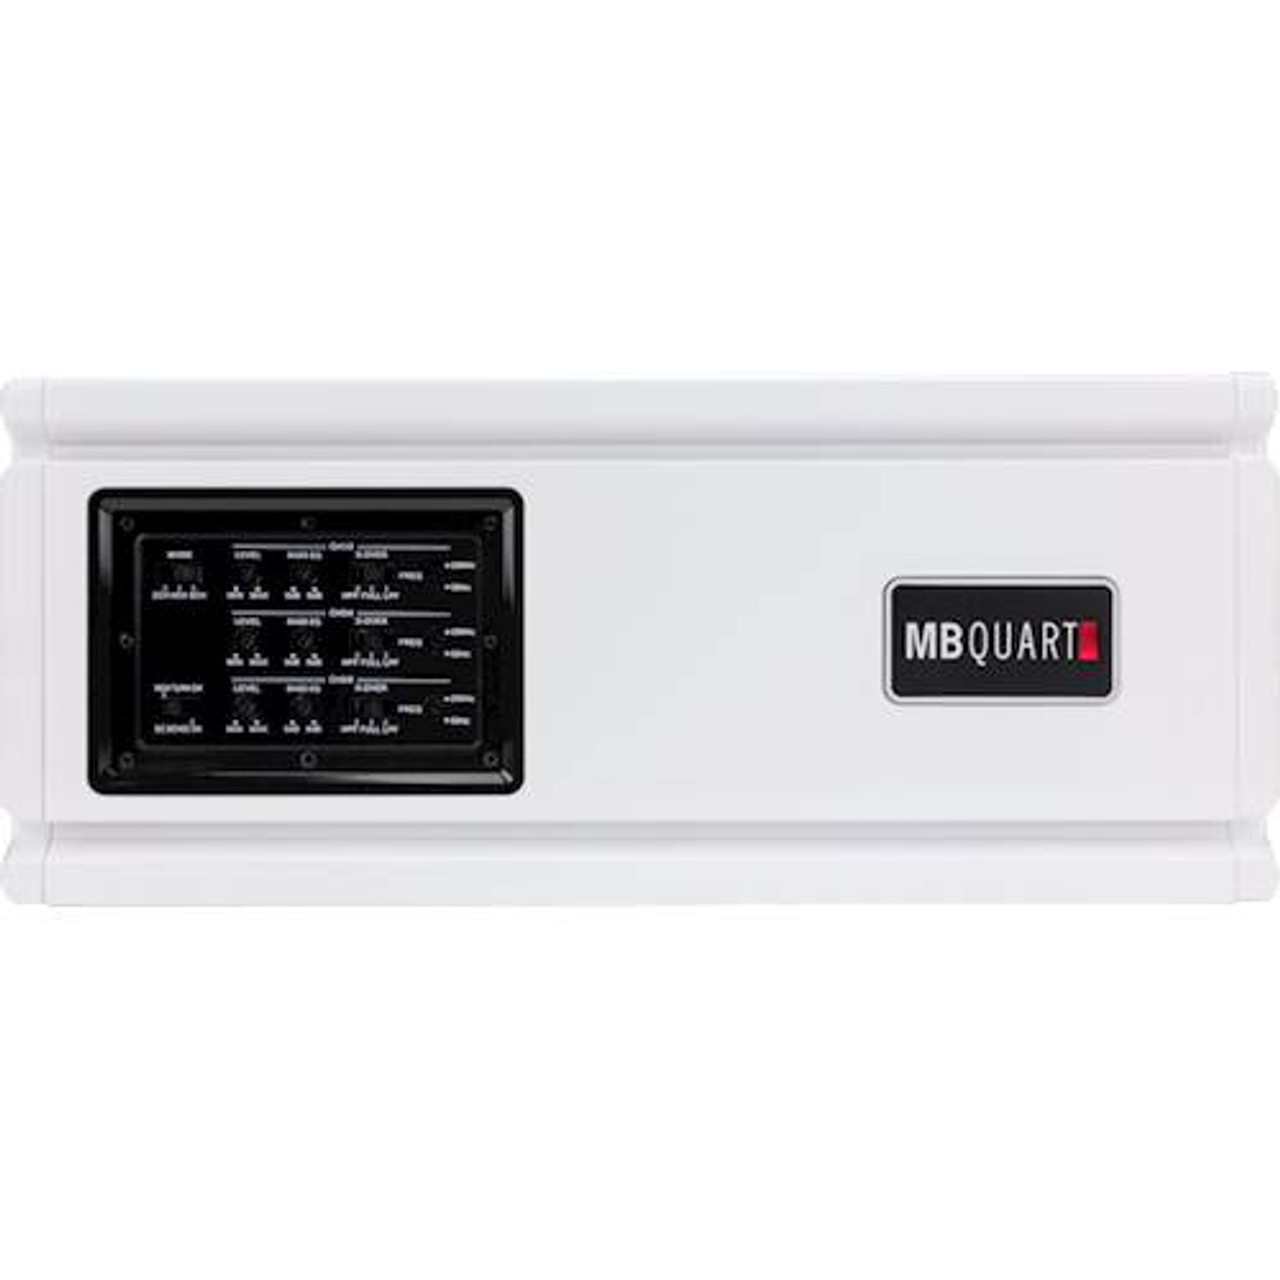 MB Quart - Nautic 600W Class AB Multichannel Amplifier with Variable Crossovers - White